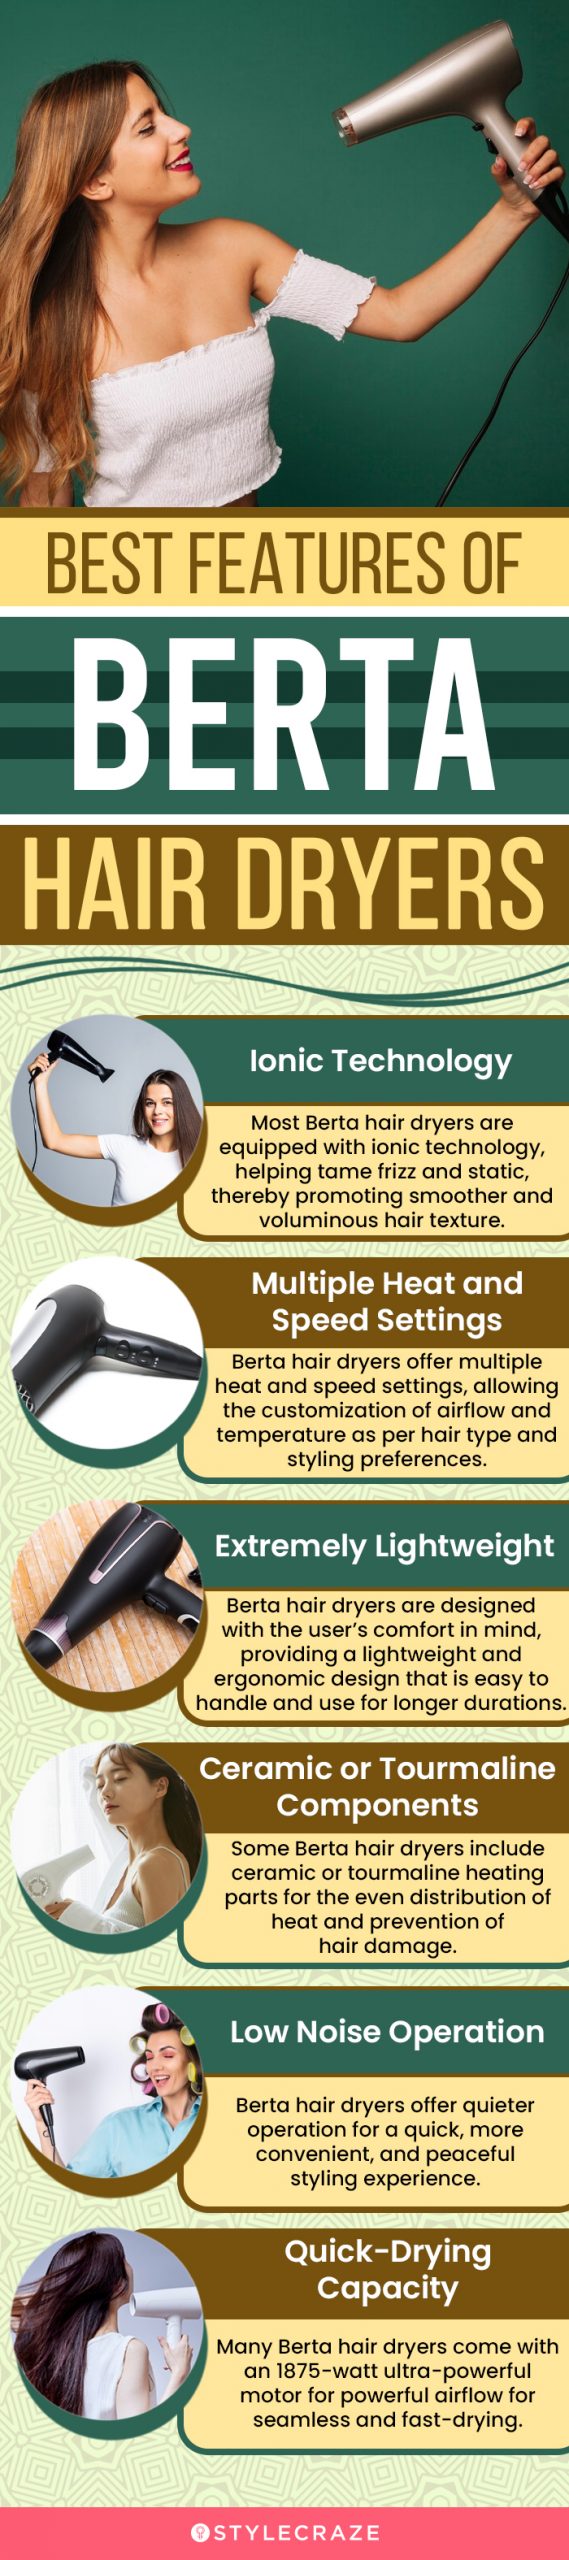 Best Features Of Berta Hair Dryers (infographic)